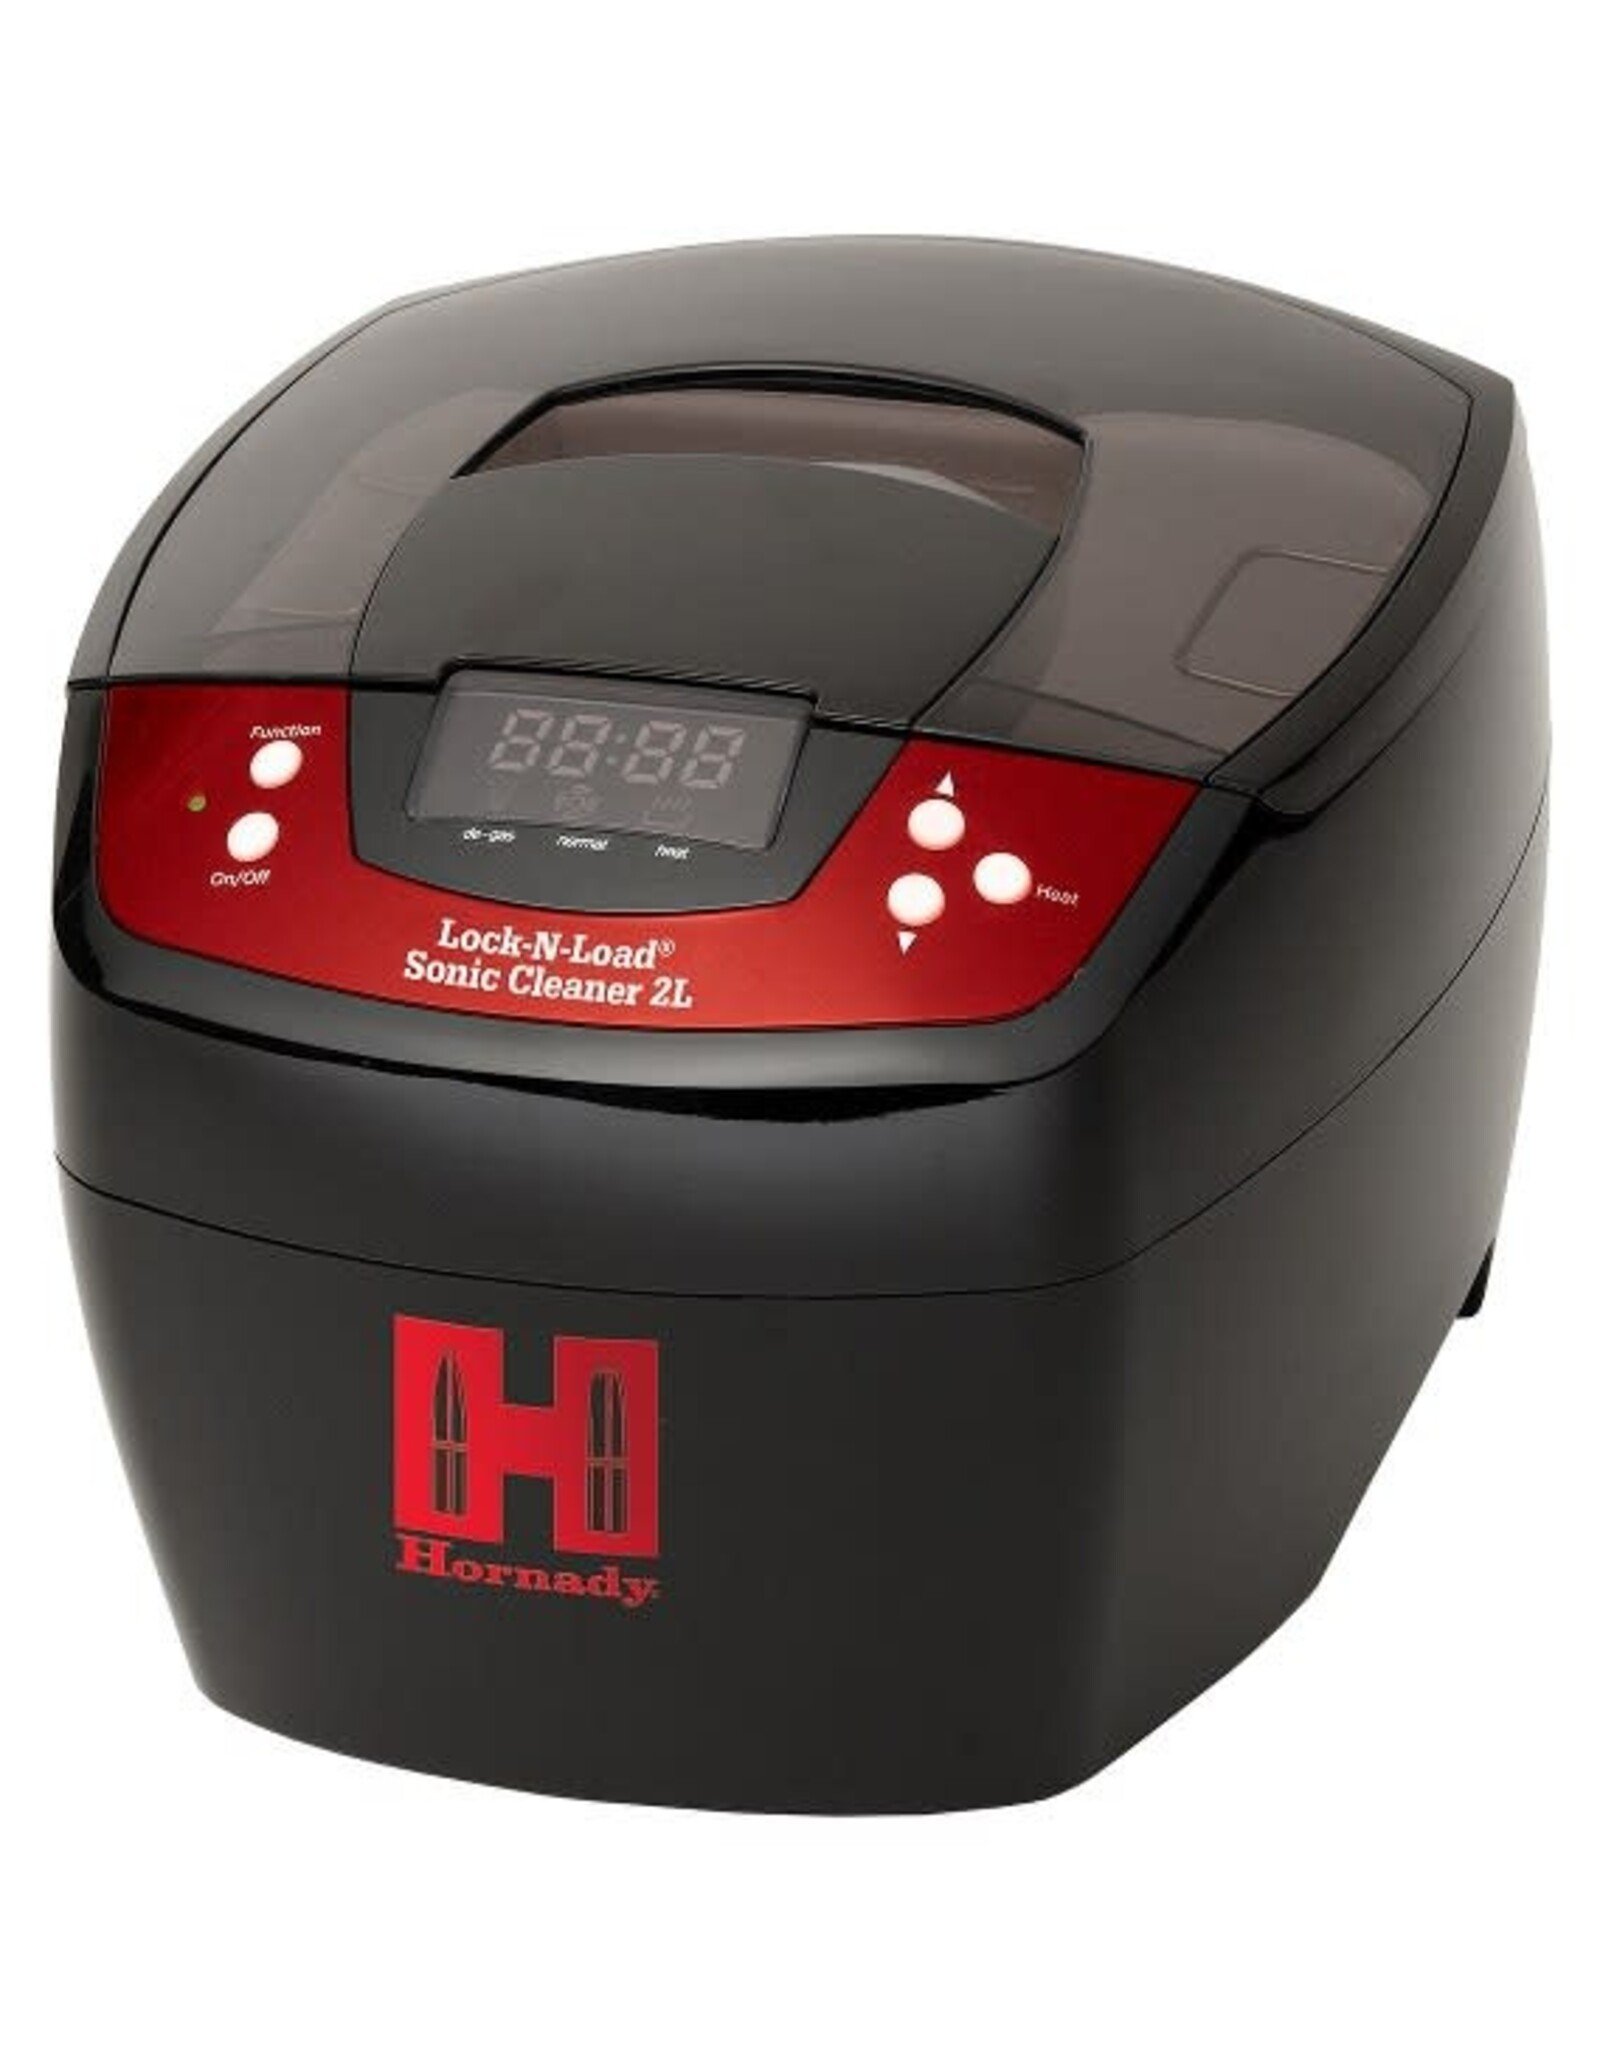 Hornady Lock-N-Load Sonic Cleaner - 2L - 110 Volt